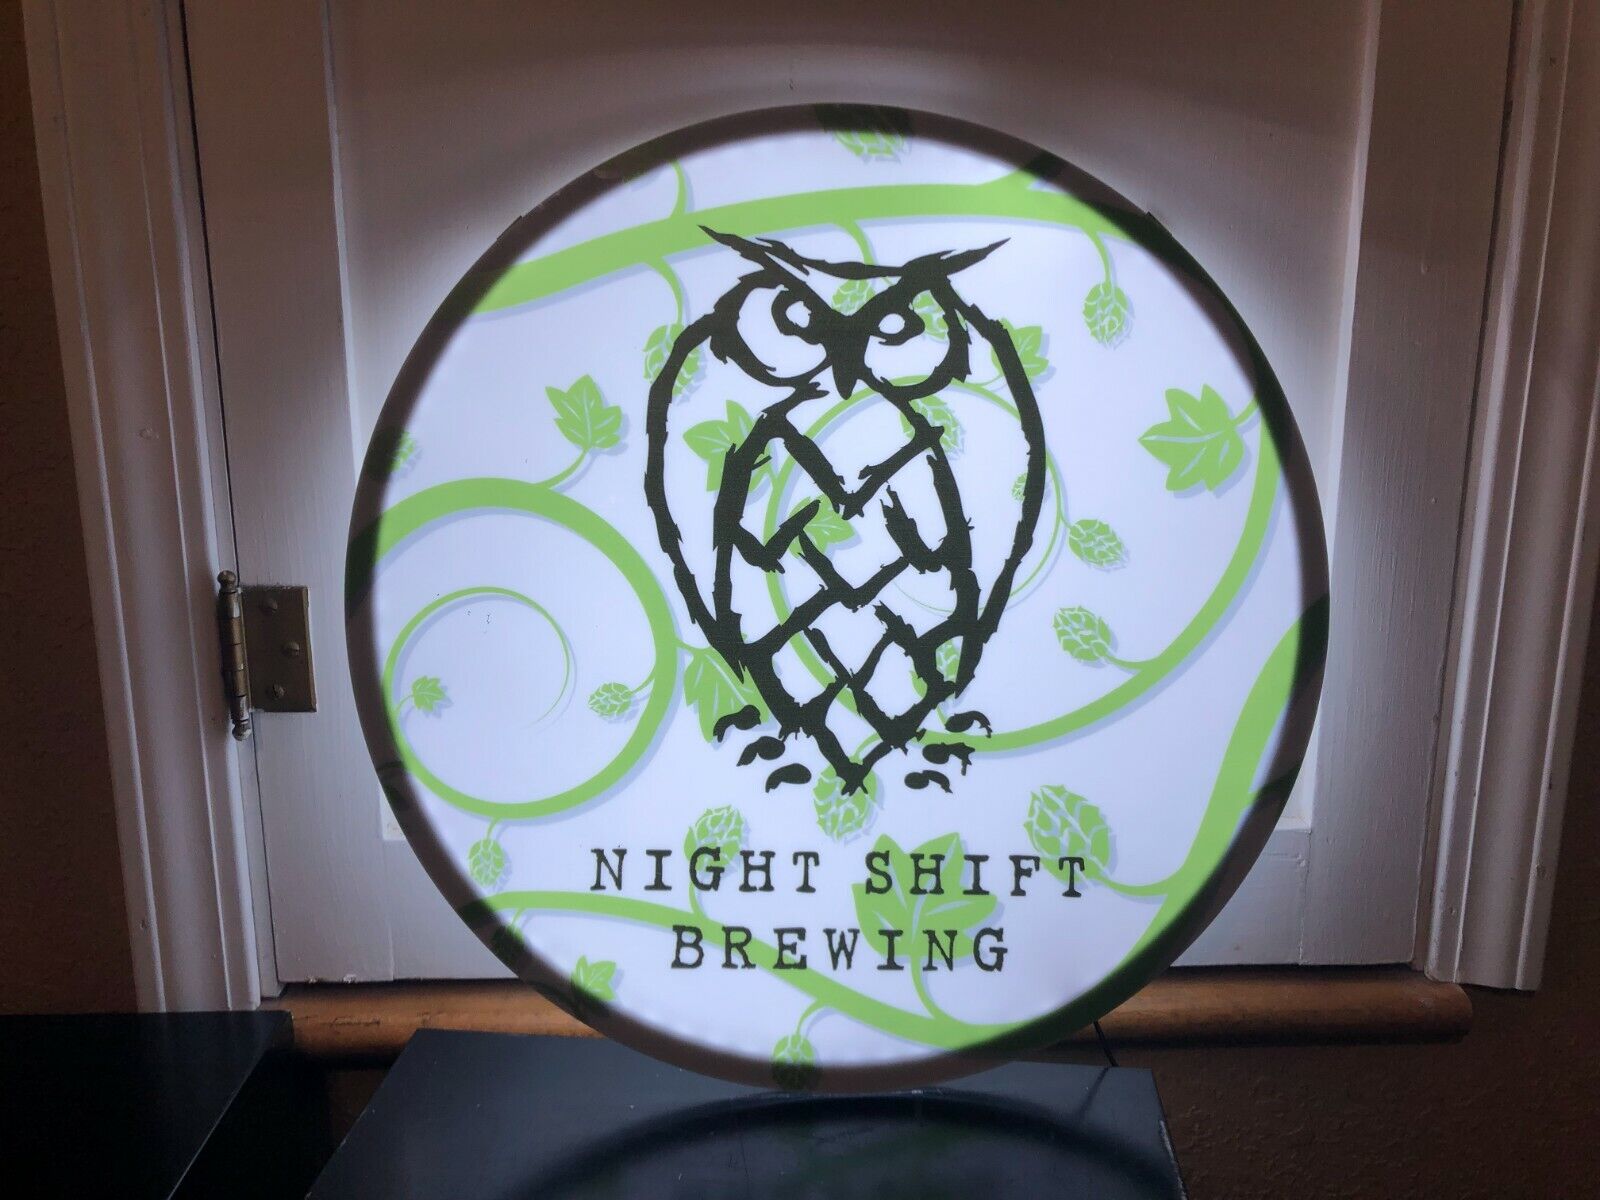 NIGHT SHIFT BREWING LED BEER BAR SIGN MAN CAVE GARAGE DECOR LIGHT BREWERY NEW